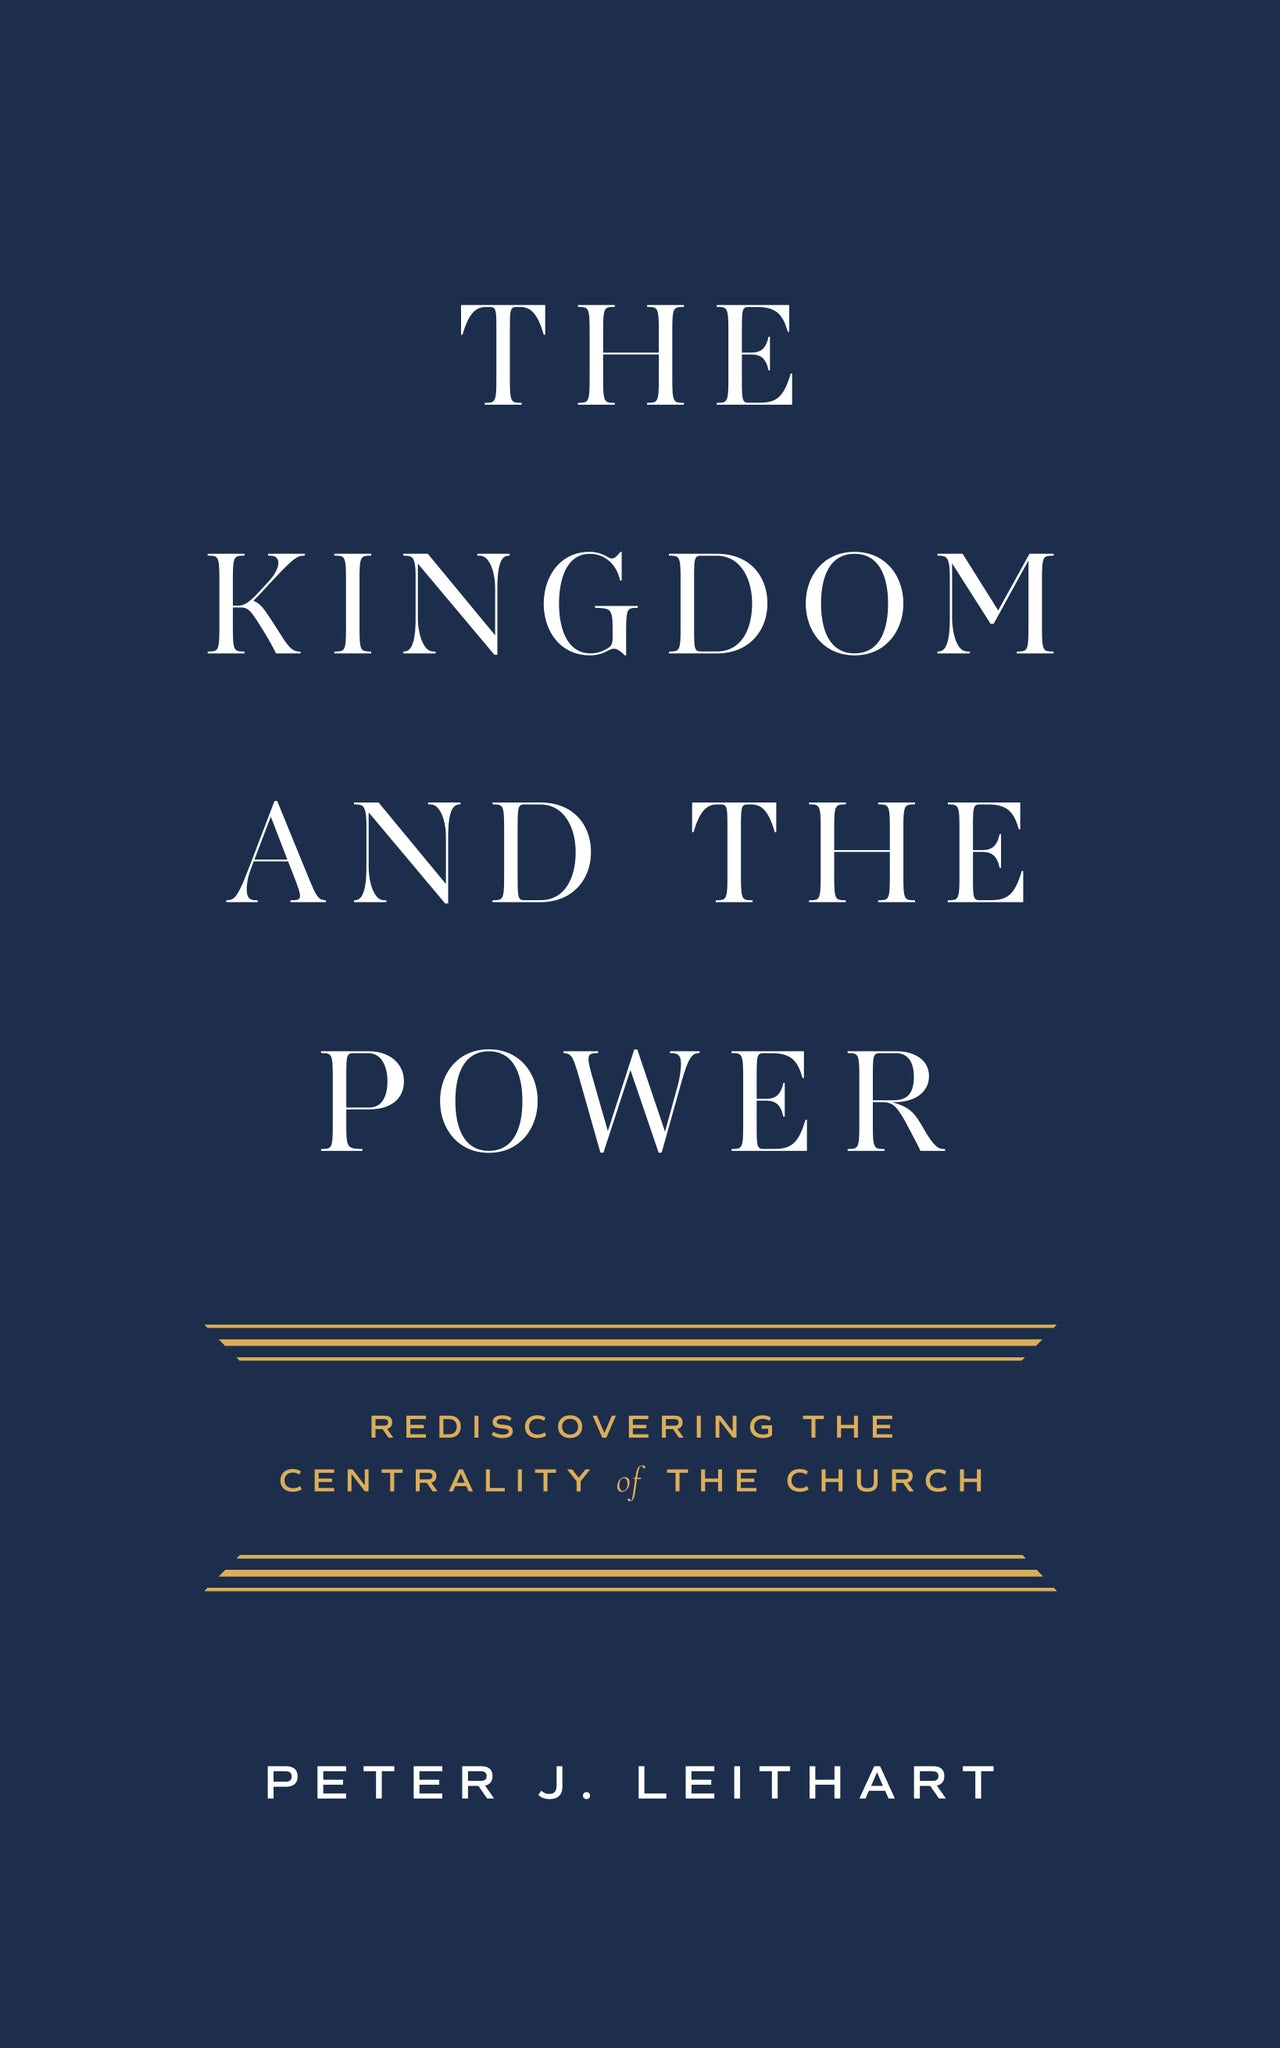 The Kingdom and the Power: Rediscovering the Centrality of the Church